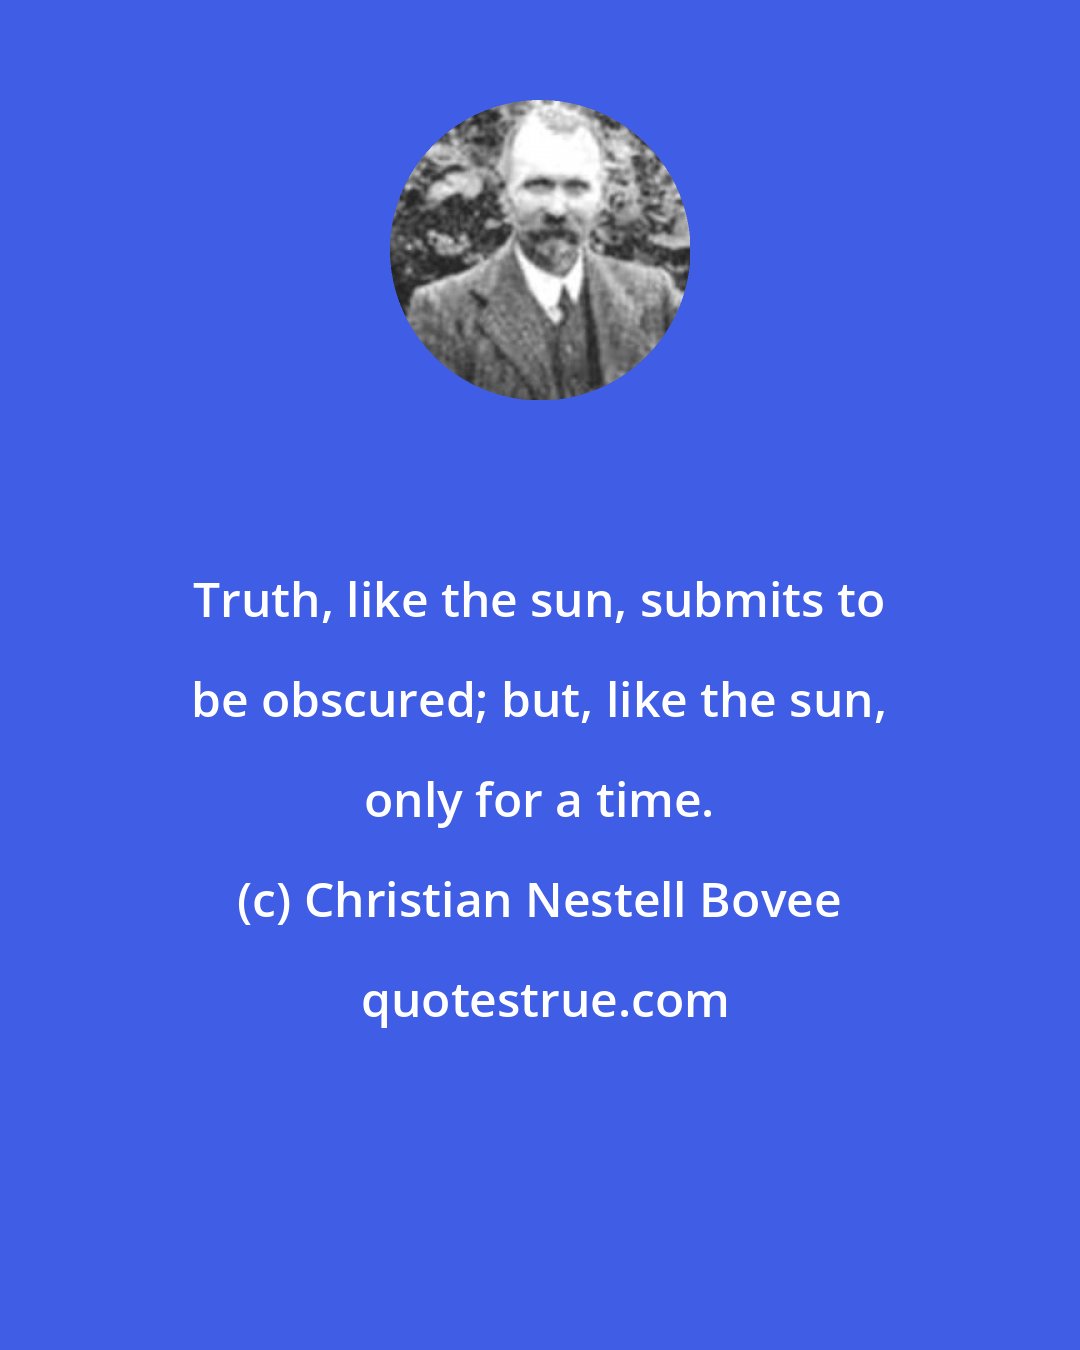 Christian Nestell Bovee: Truth, like the sun, submits to be obscured; but, like the sun, only for a time.